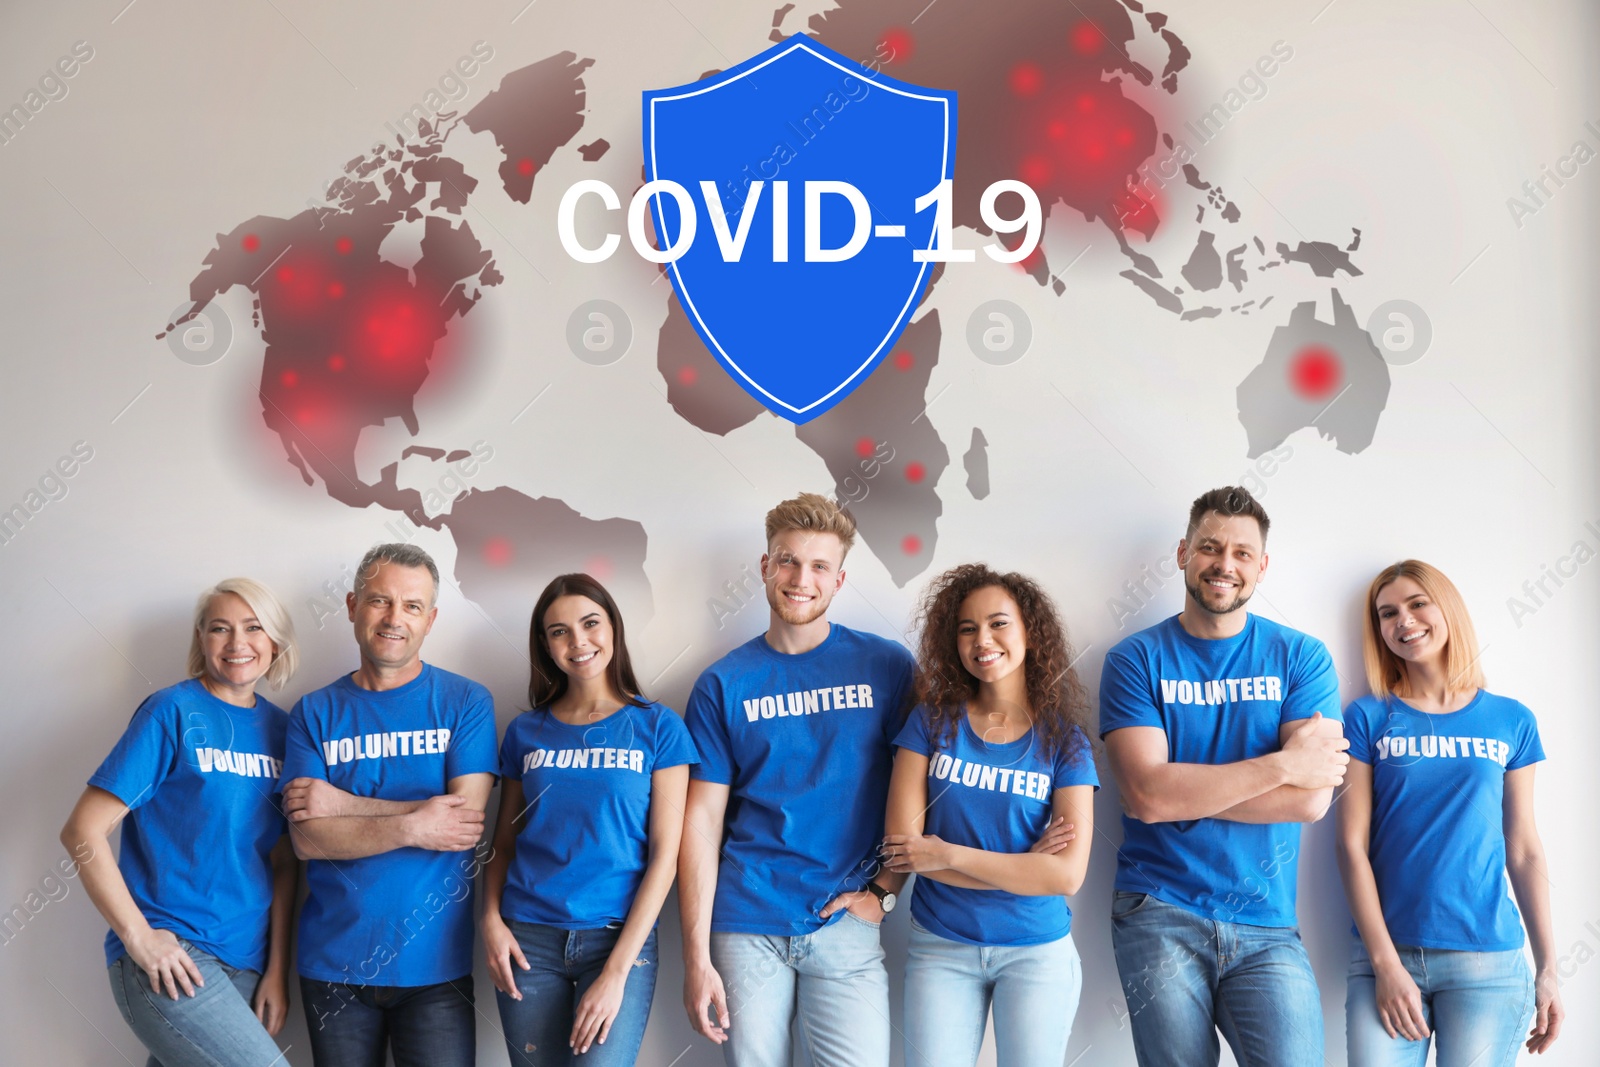 Image of Volunteers uniting to help during COVID-19 outbreak. Group of people on light background, world map and shield illustrations